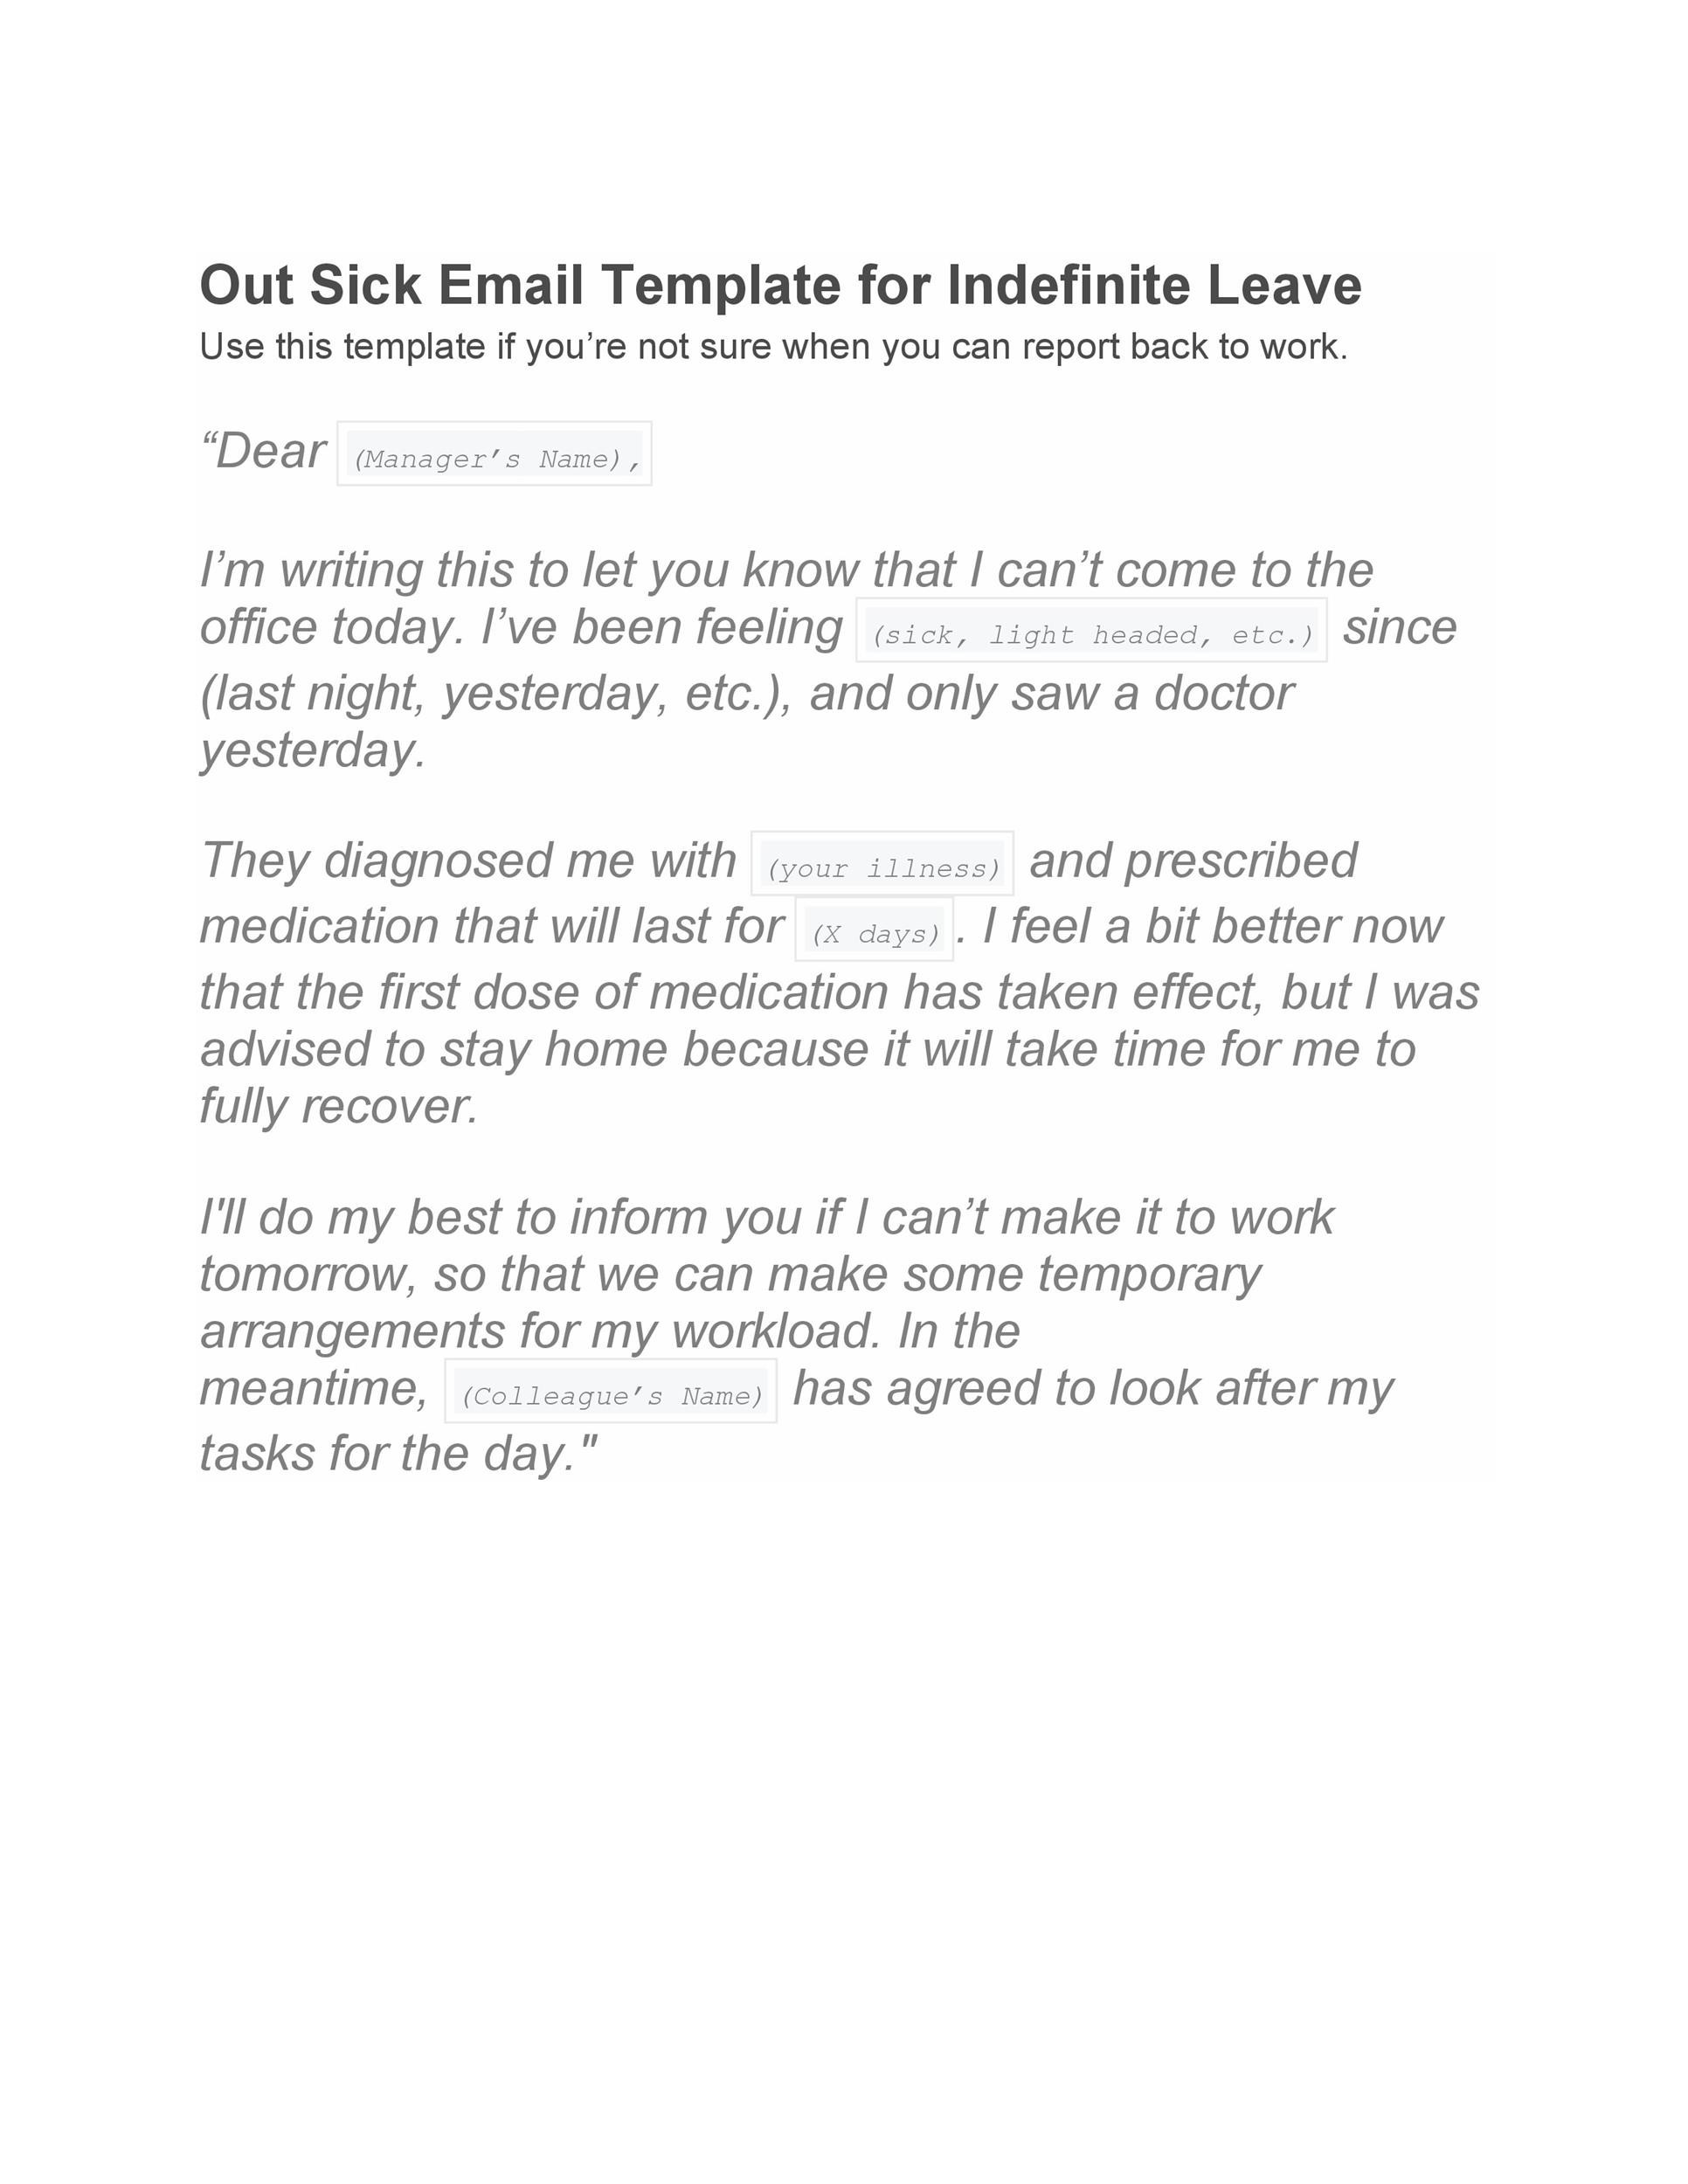 Free sick leave email 09